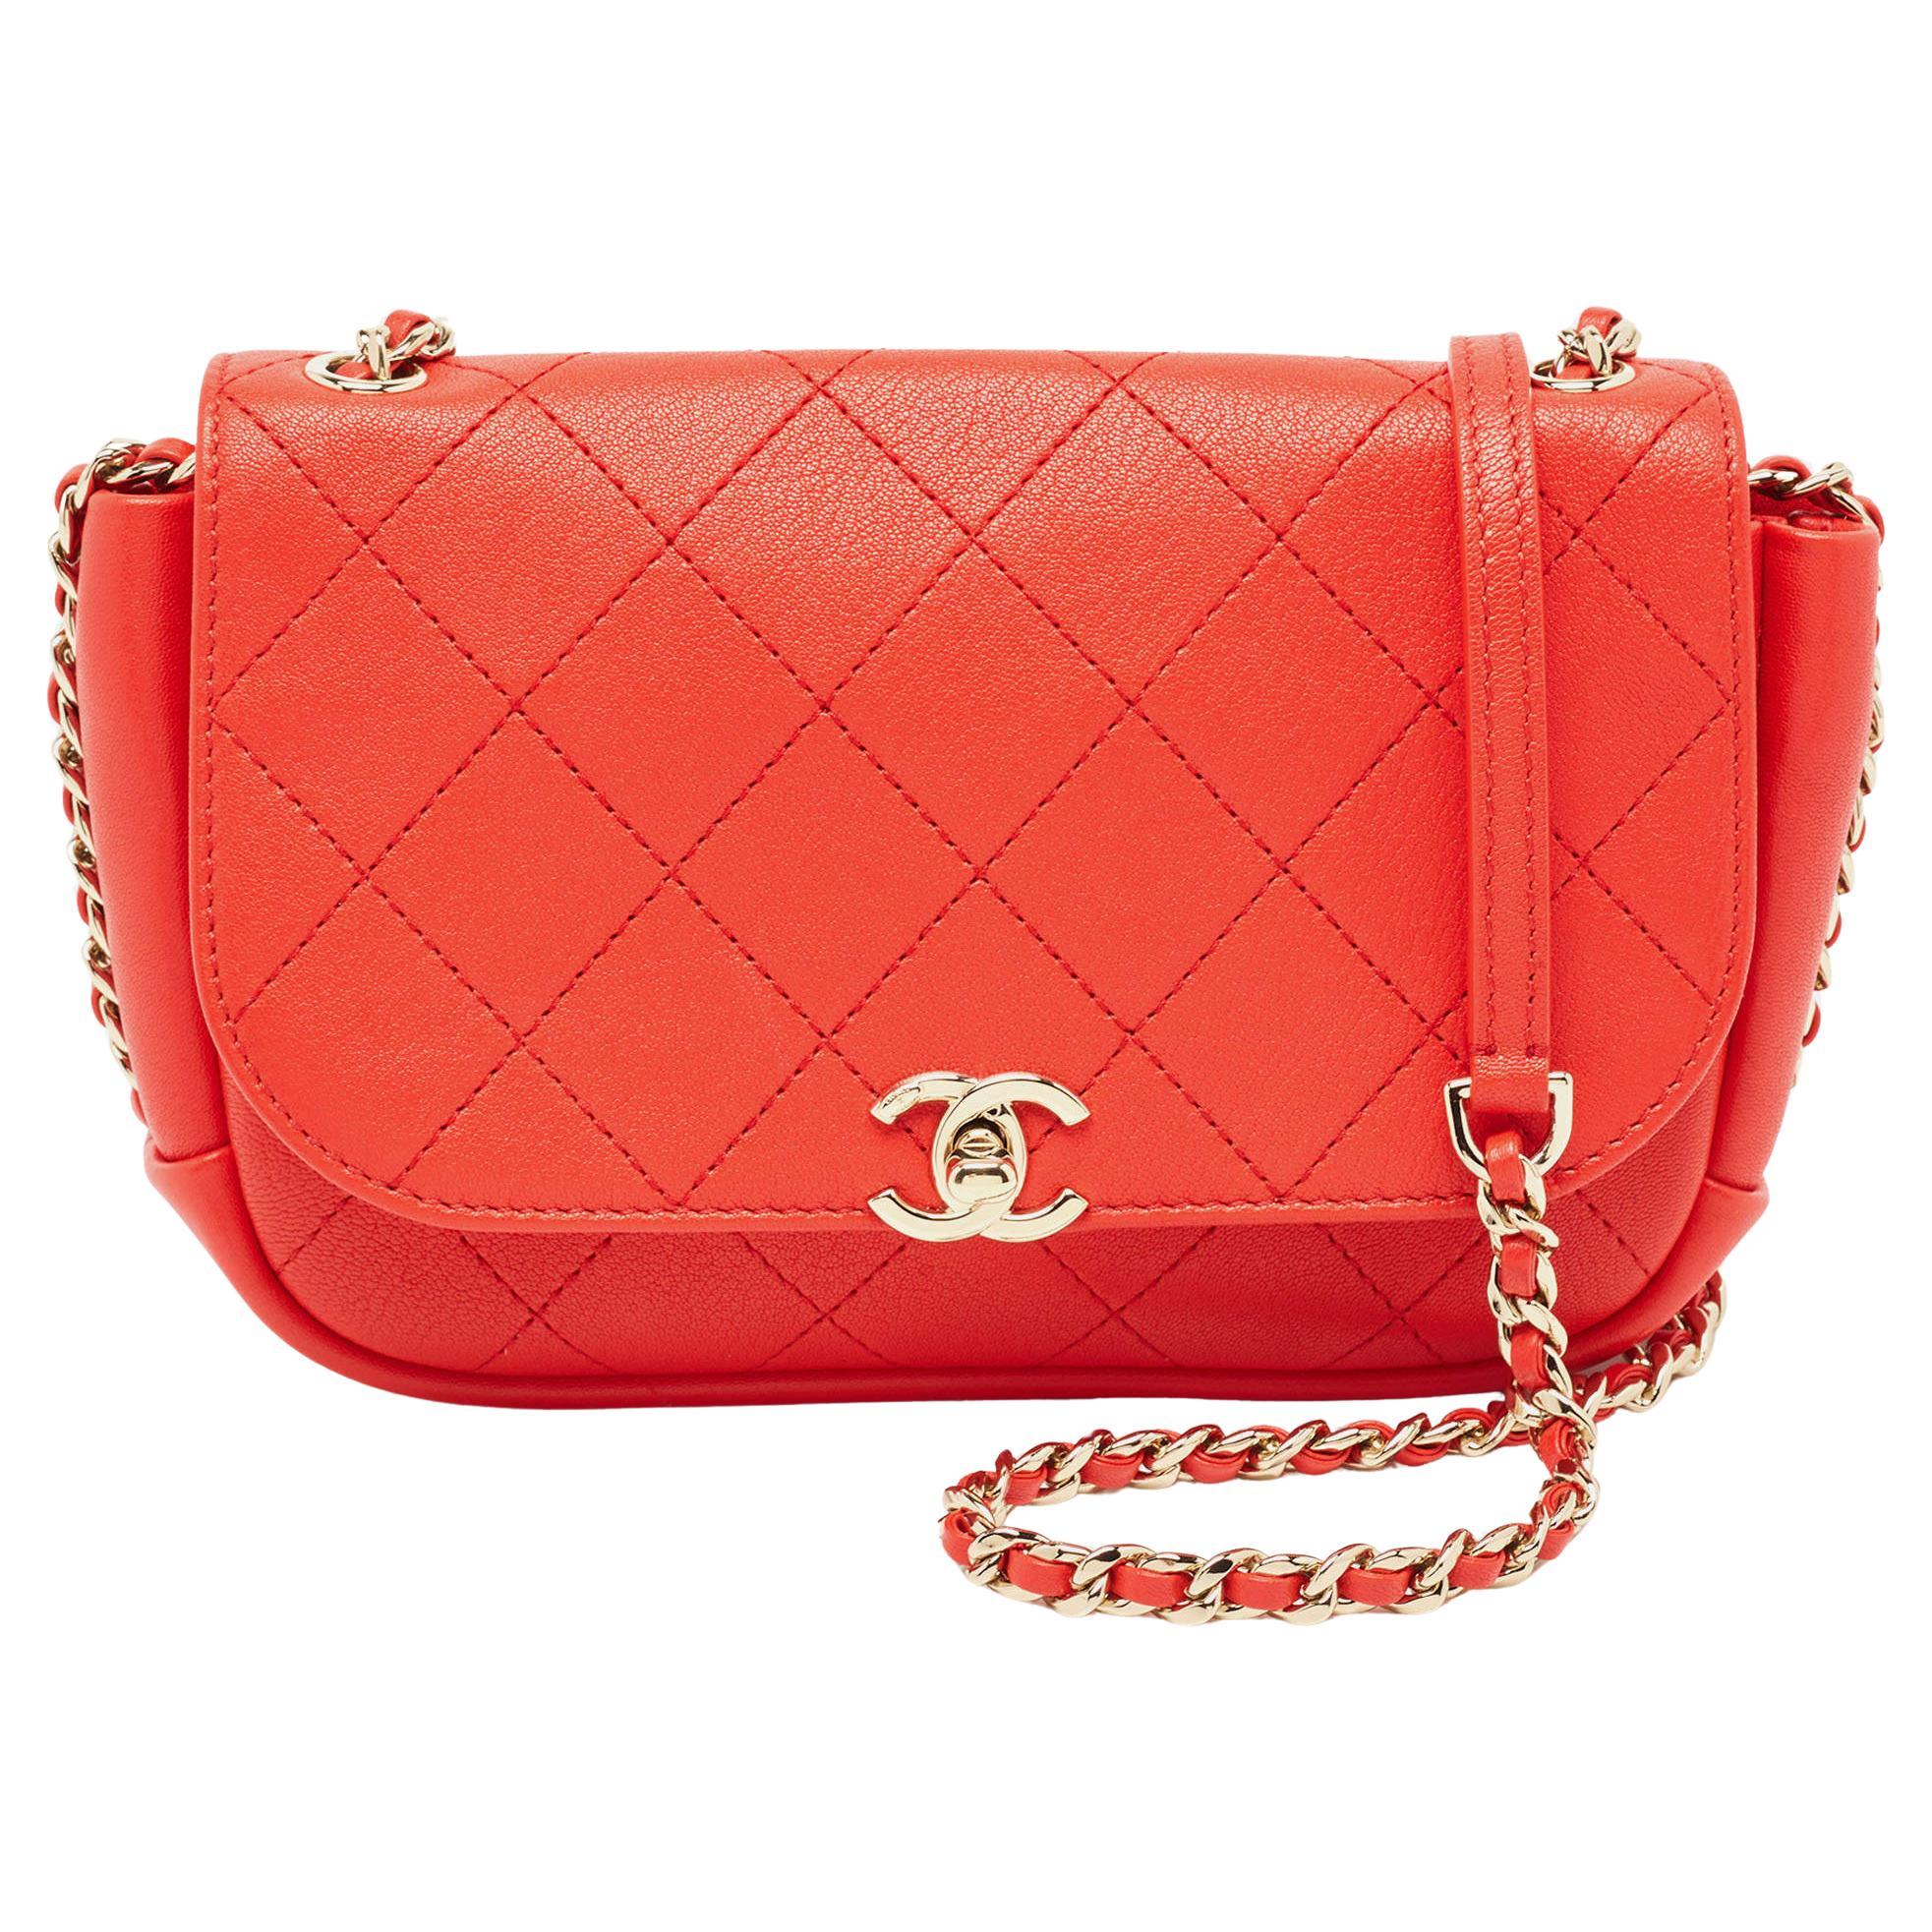 Chanel Red Quilted Leather Small Casual Trip Flap Bag For Sale